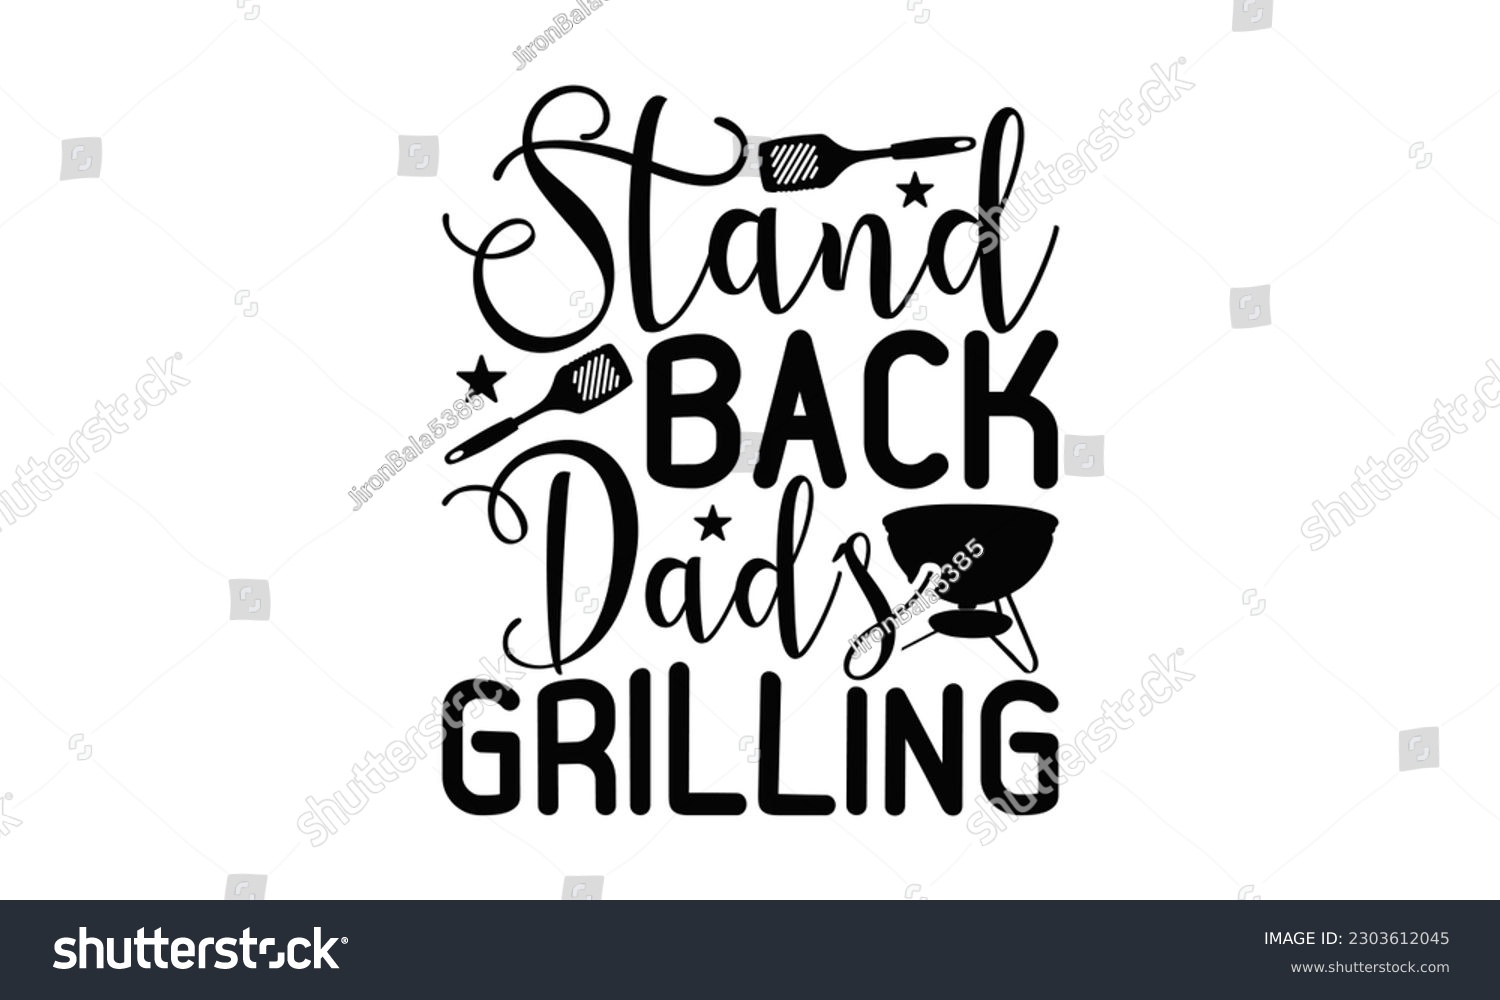 SVG of Stand Back Dad’s Grilling - Barbecue SVG Design, Hand drawn vintage hand lettering, EPS, Files for Cutting, Illustration for prints on t-shirts, bags, posters, cards and Mug.

 svg